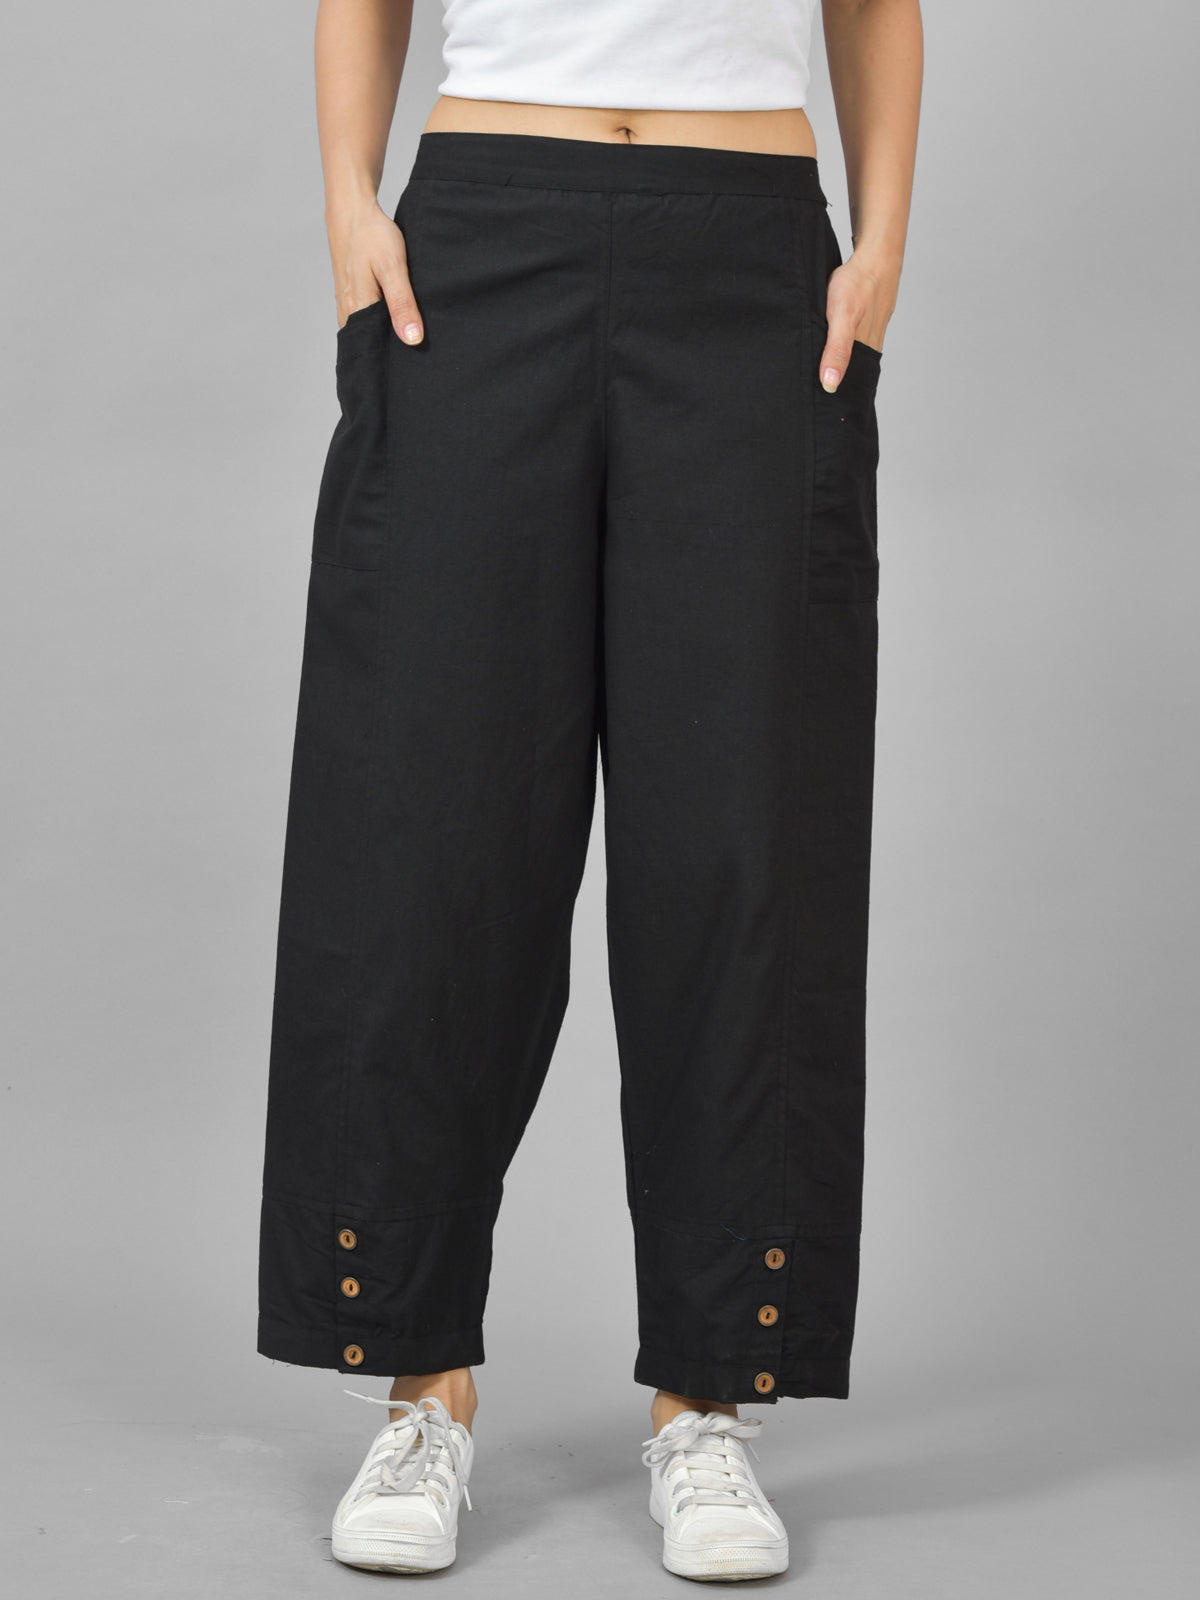 Combo Pack Of Womens Black And Melange Grey Side Pocket Straight Cargo Pants